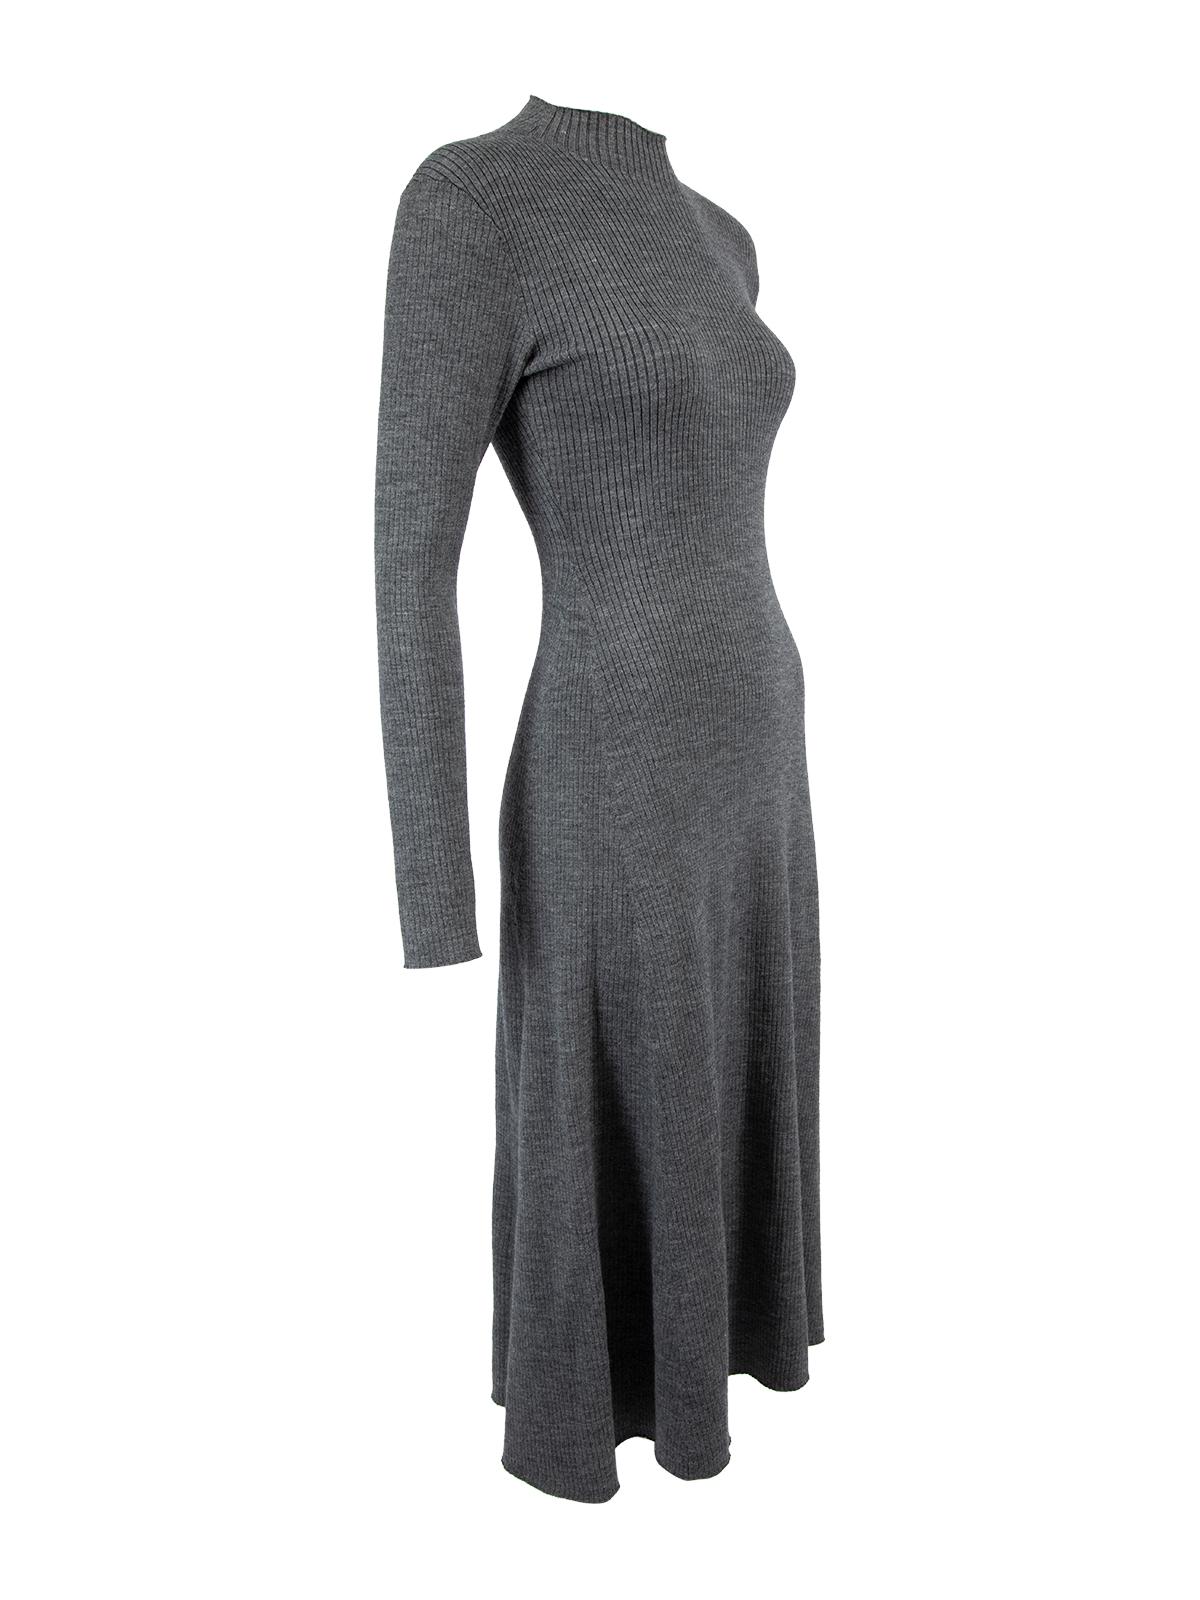 CONDITION is Very Good. Very light piling is visible on areas such as the underarms, neckline and hem of this dress. There is no other wear to this used Maje designer resale item.  Details  Grey Knit Acrylic, wool blend High neck Long sleeves Midi